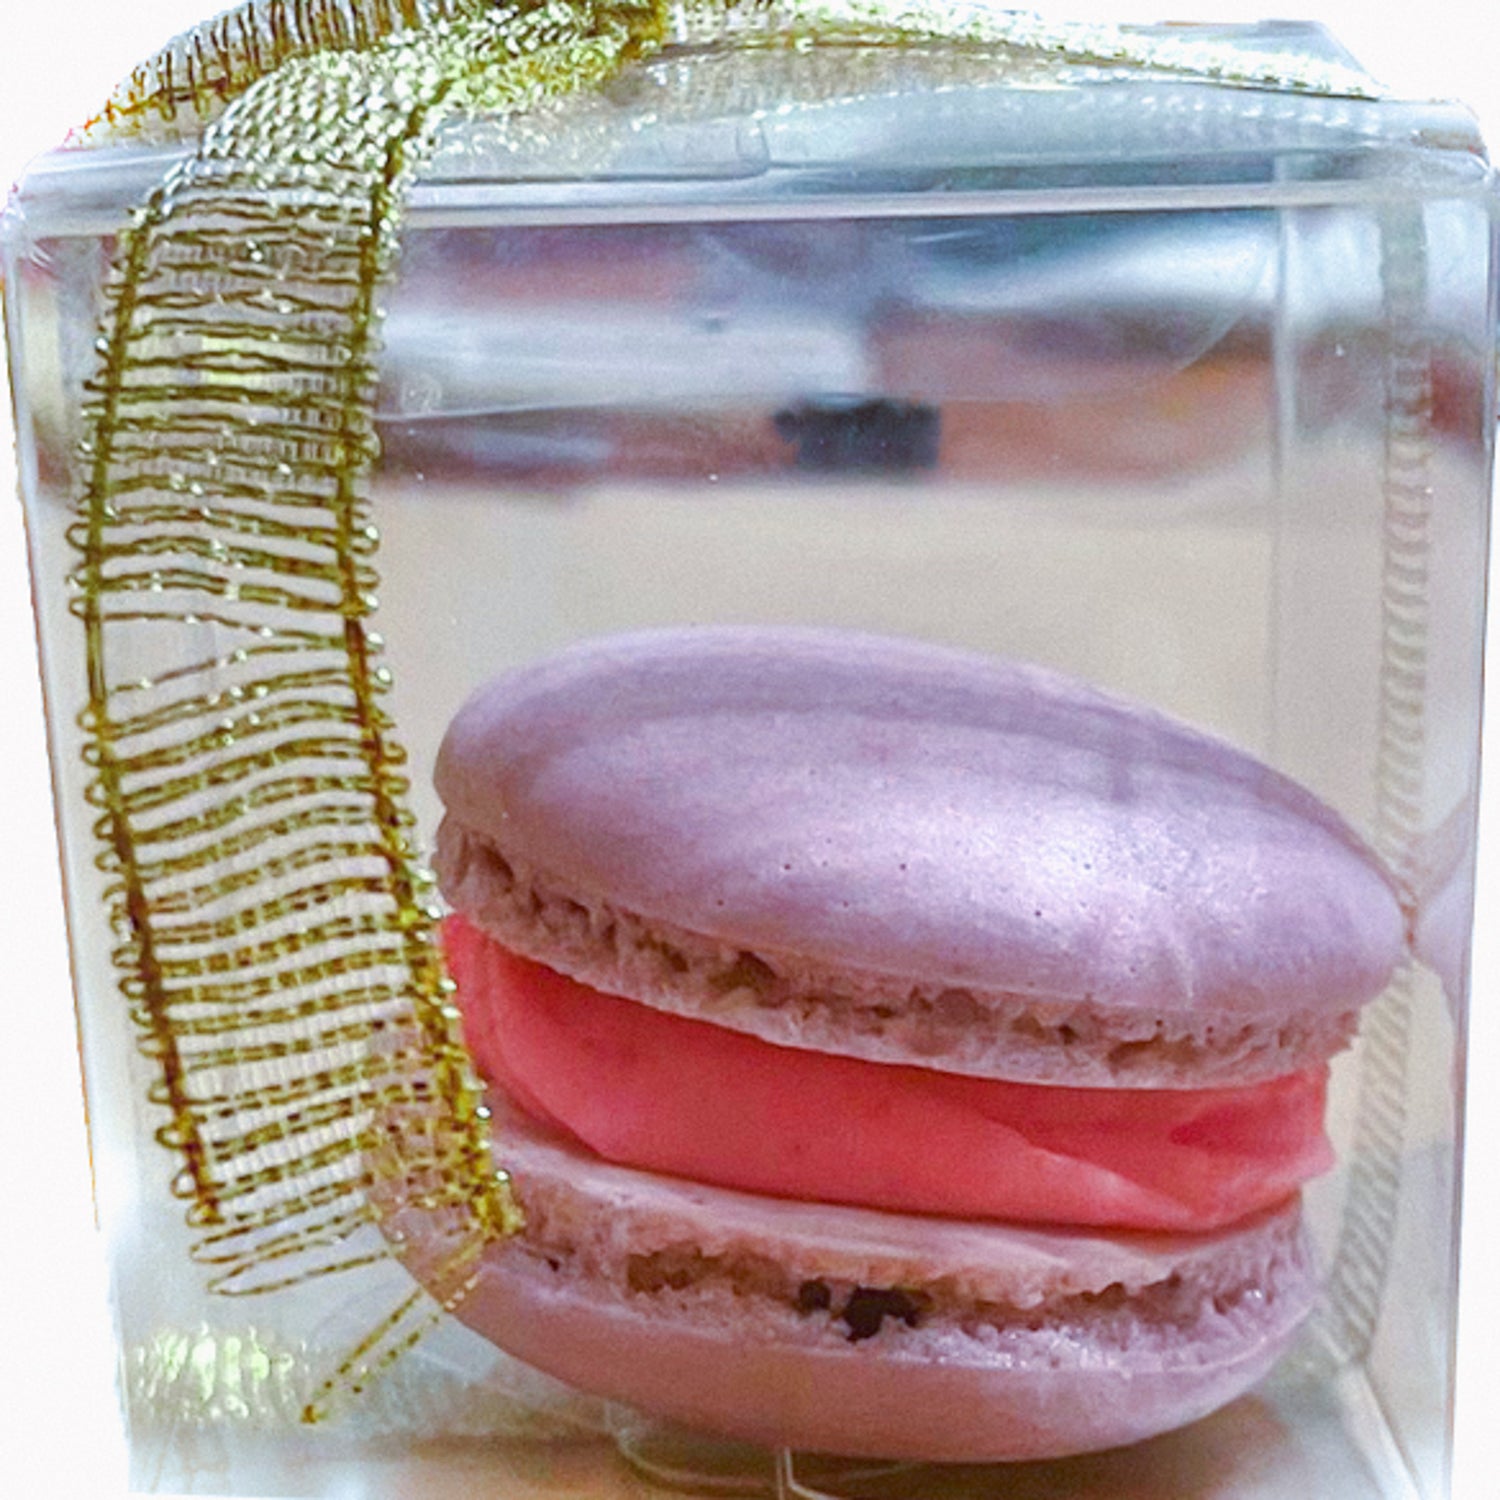 Pink macaron with pink filling individually wrapped in a clear box with a gold bow